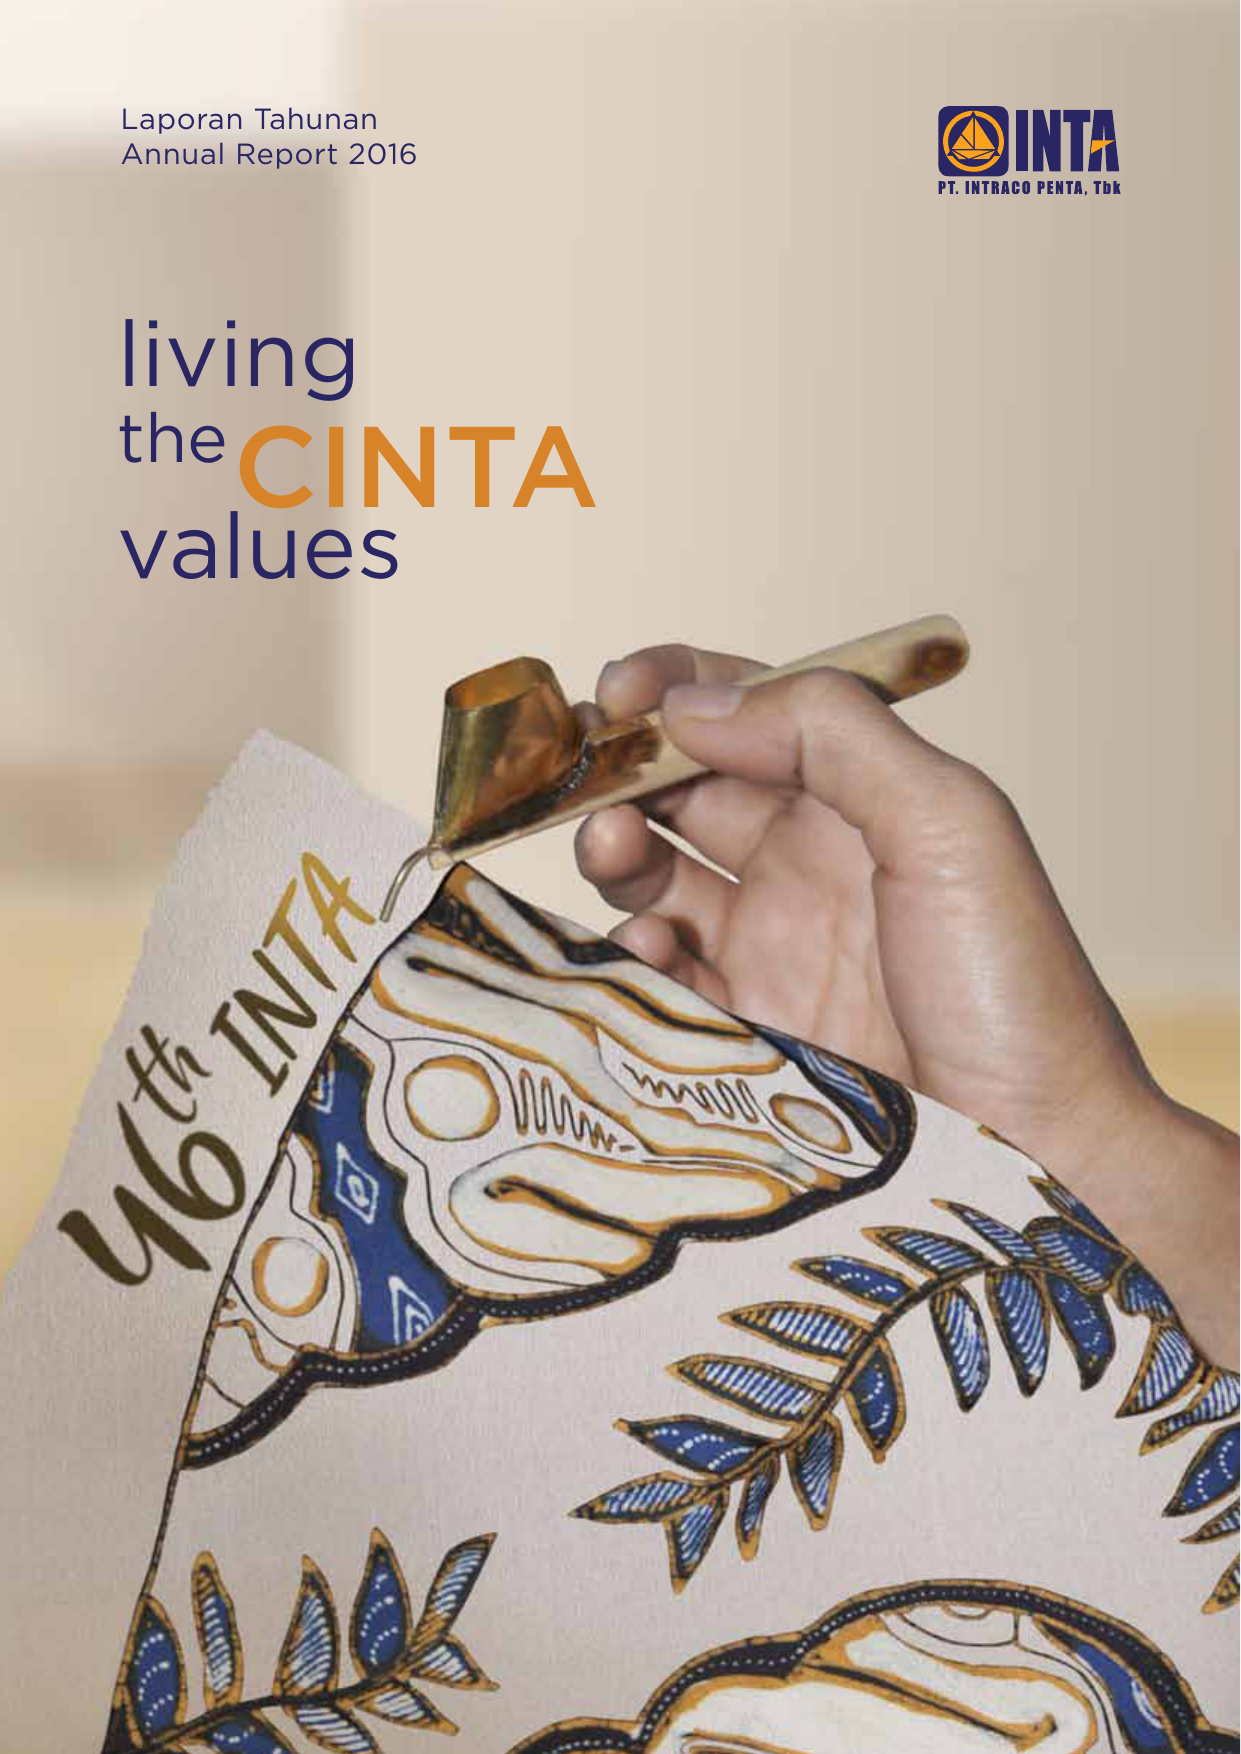 Laporan Tahunan Annual Report 2016 living the CINTA values DAFTAR ISI TABLE OF CONTENTS 01 Intraco Penta s profile 24 35 PROFIL INTRACO PENTA Laporan